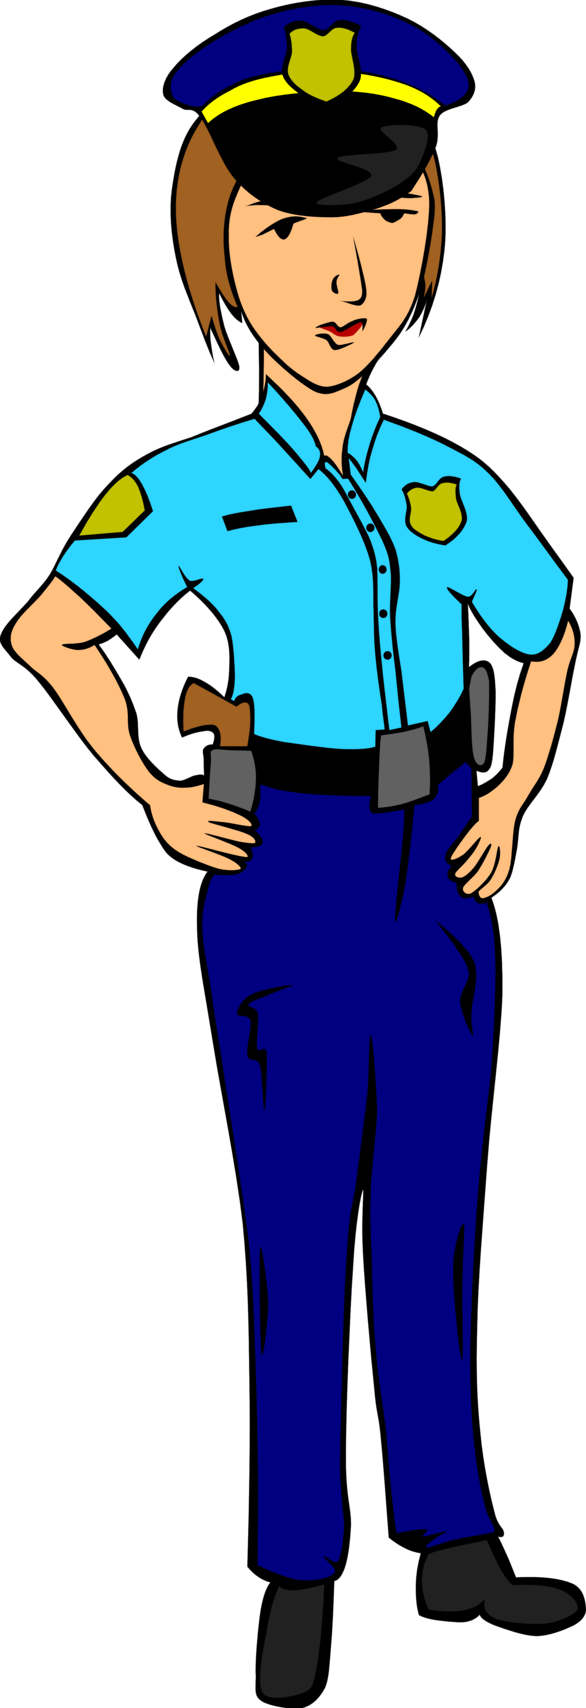 Policeman Clipart - Free Clipart Images